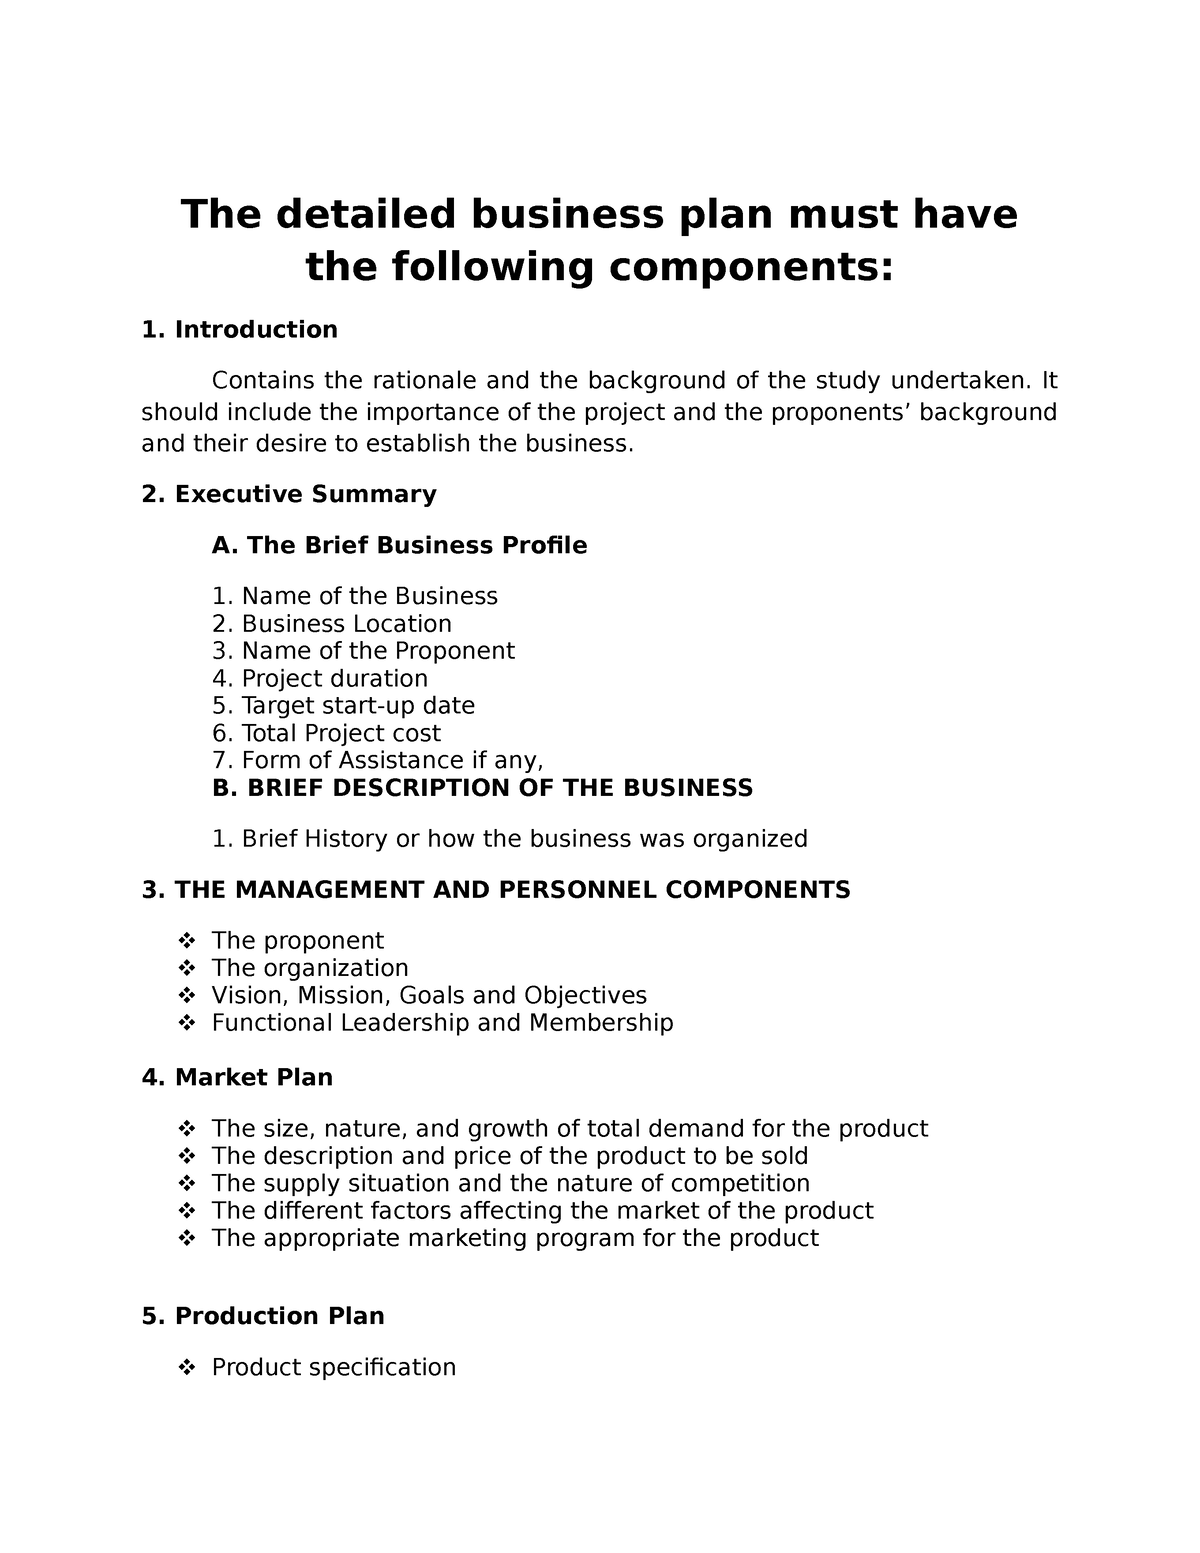 example of project proponent in business plan